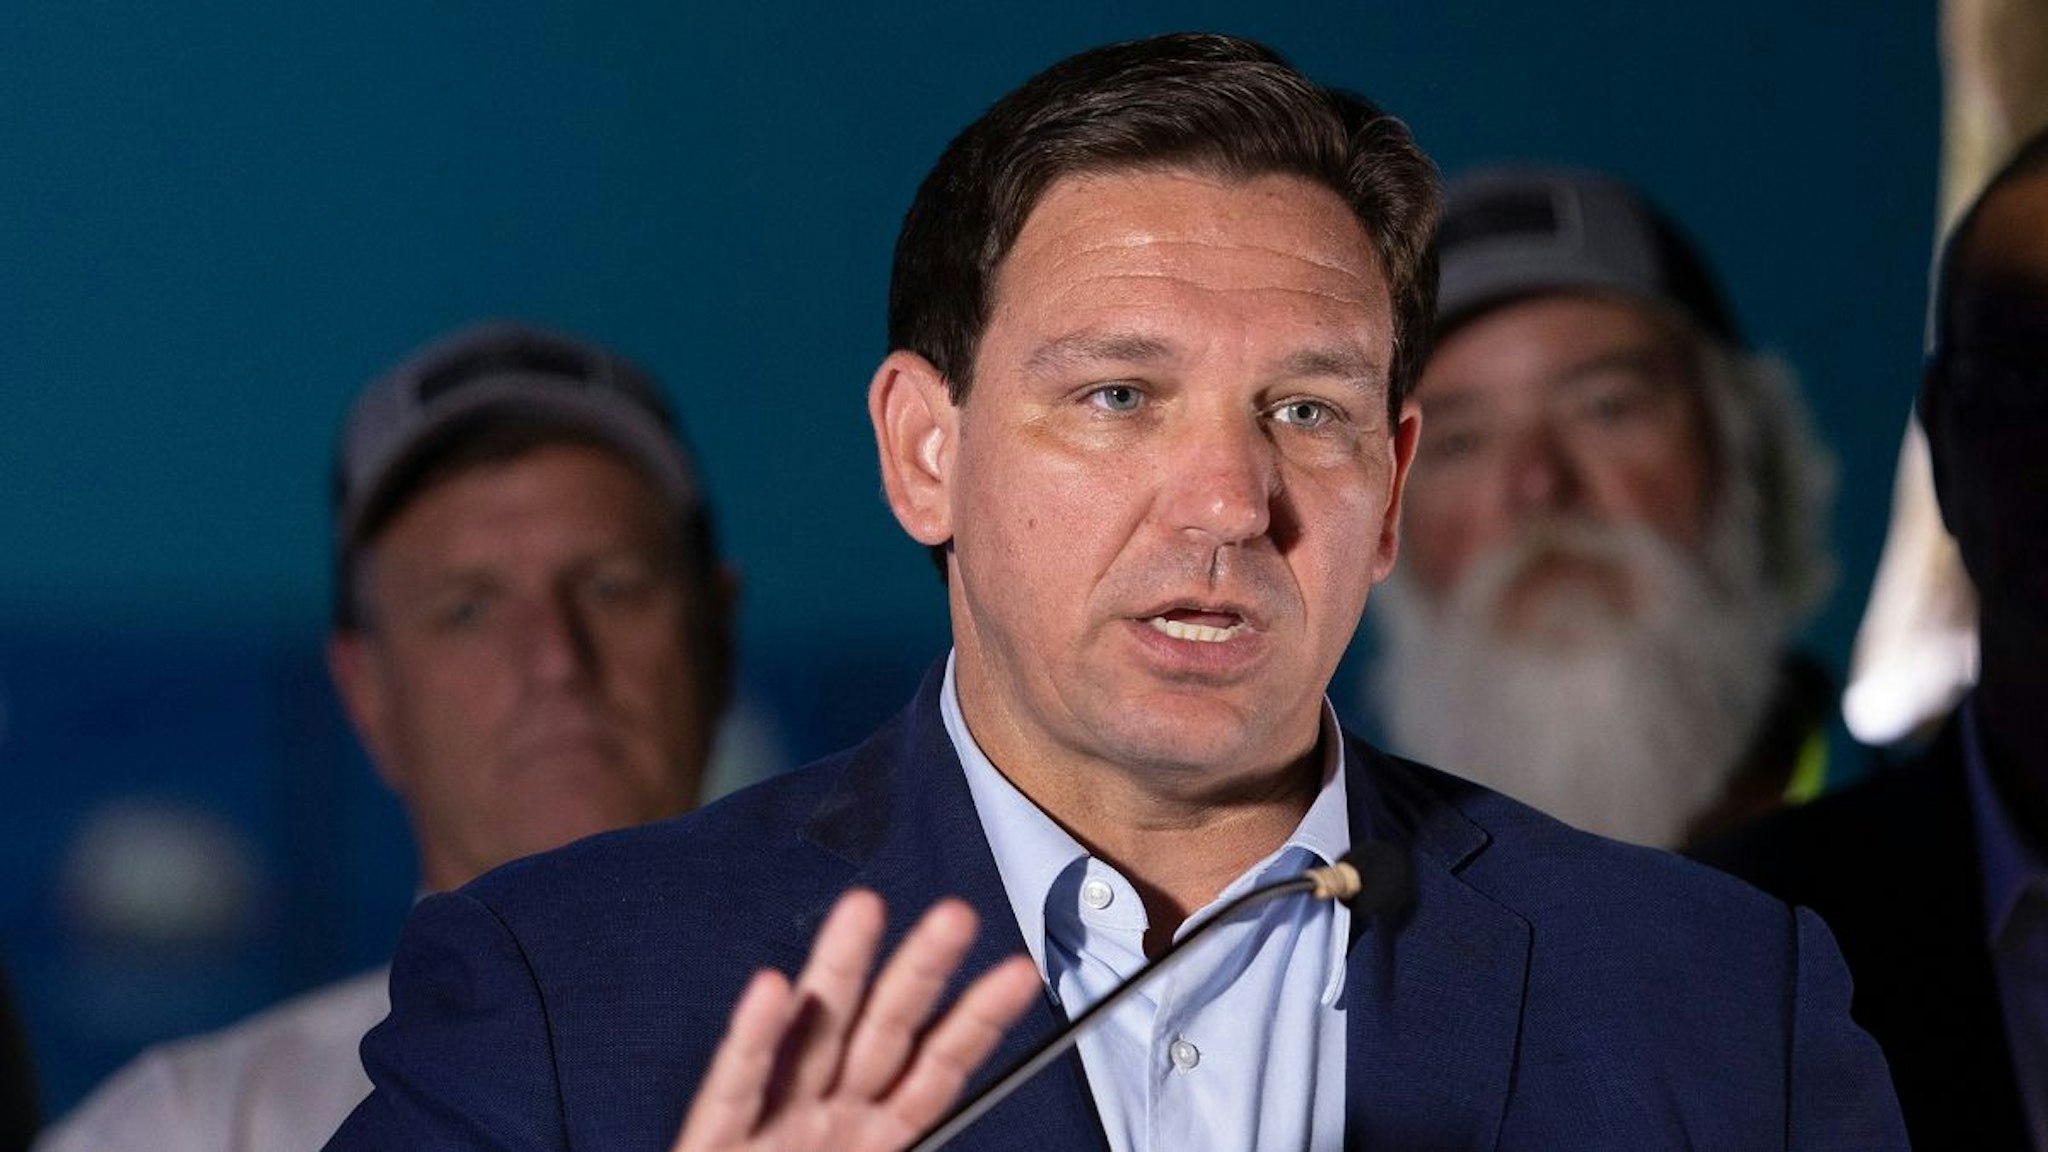 Florida Gov. Ron DeSantis speaks during a press conference held at the Cox Science Center & Aquarium on June 08, 2022 in West Palm Beach, Florida.